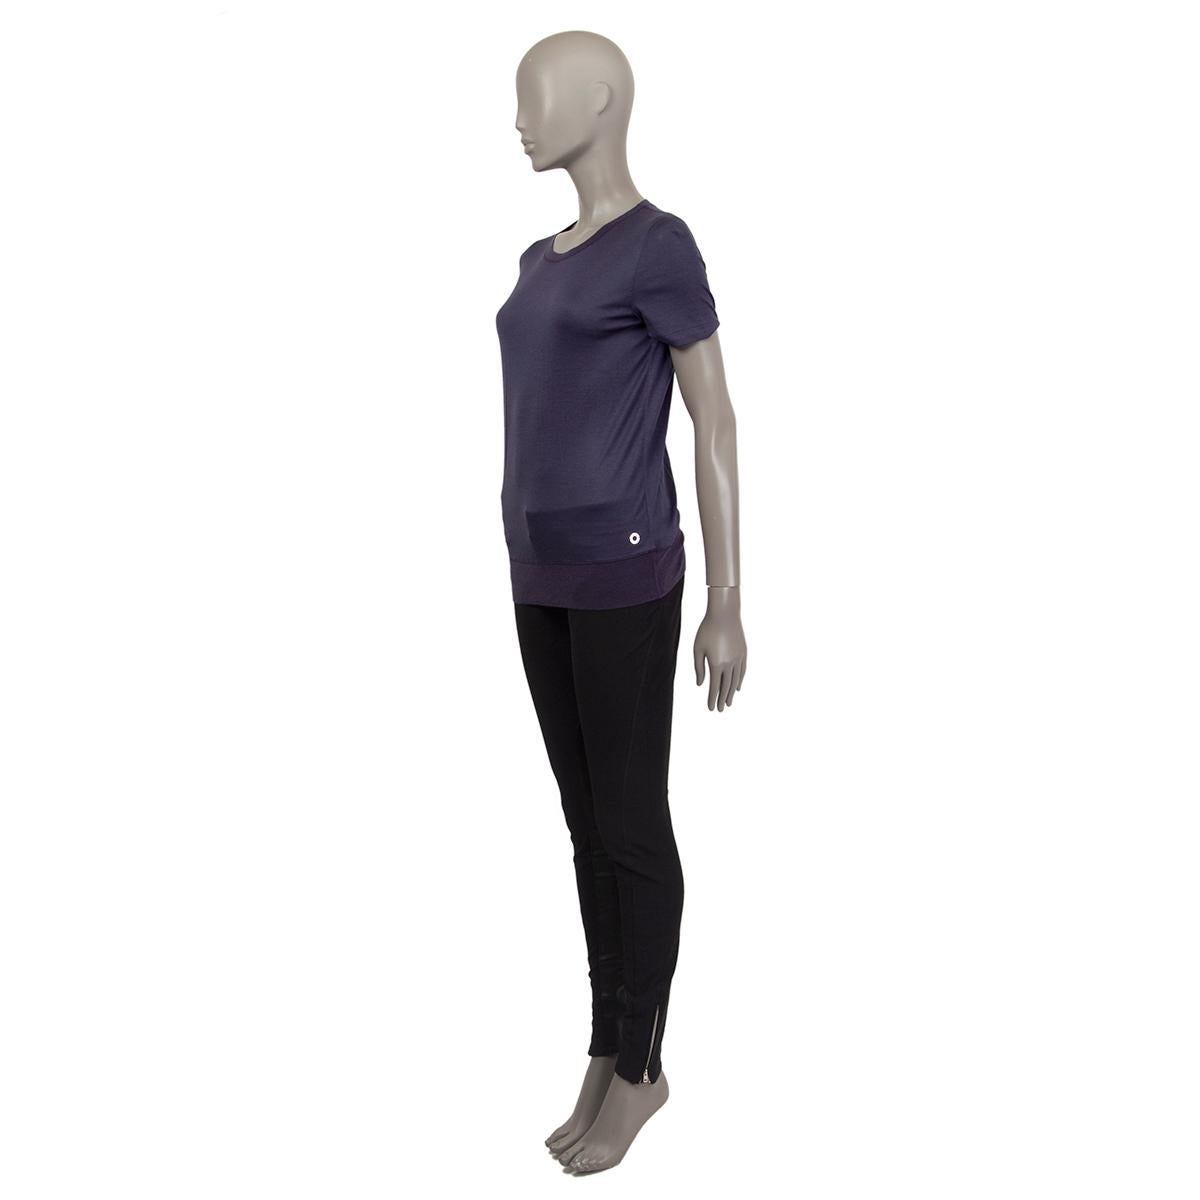 Loro Piana short sleeve sweater in violet cashmere (70%) and silk (30%). Has been worn and is in excellent condition.

Tag Size 42
Size M
Shoulder Width 37cm (14.4in)
Bust 88cm (34.3in) to 92cm (35.9in)
Waist 86cm (33.5in) to 92cm (35.9in)
Hips 82cm